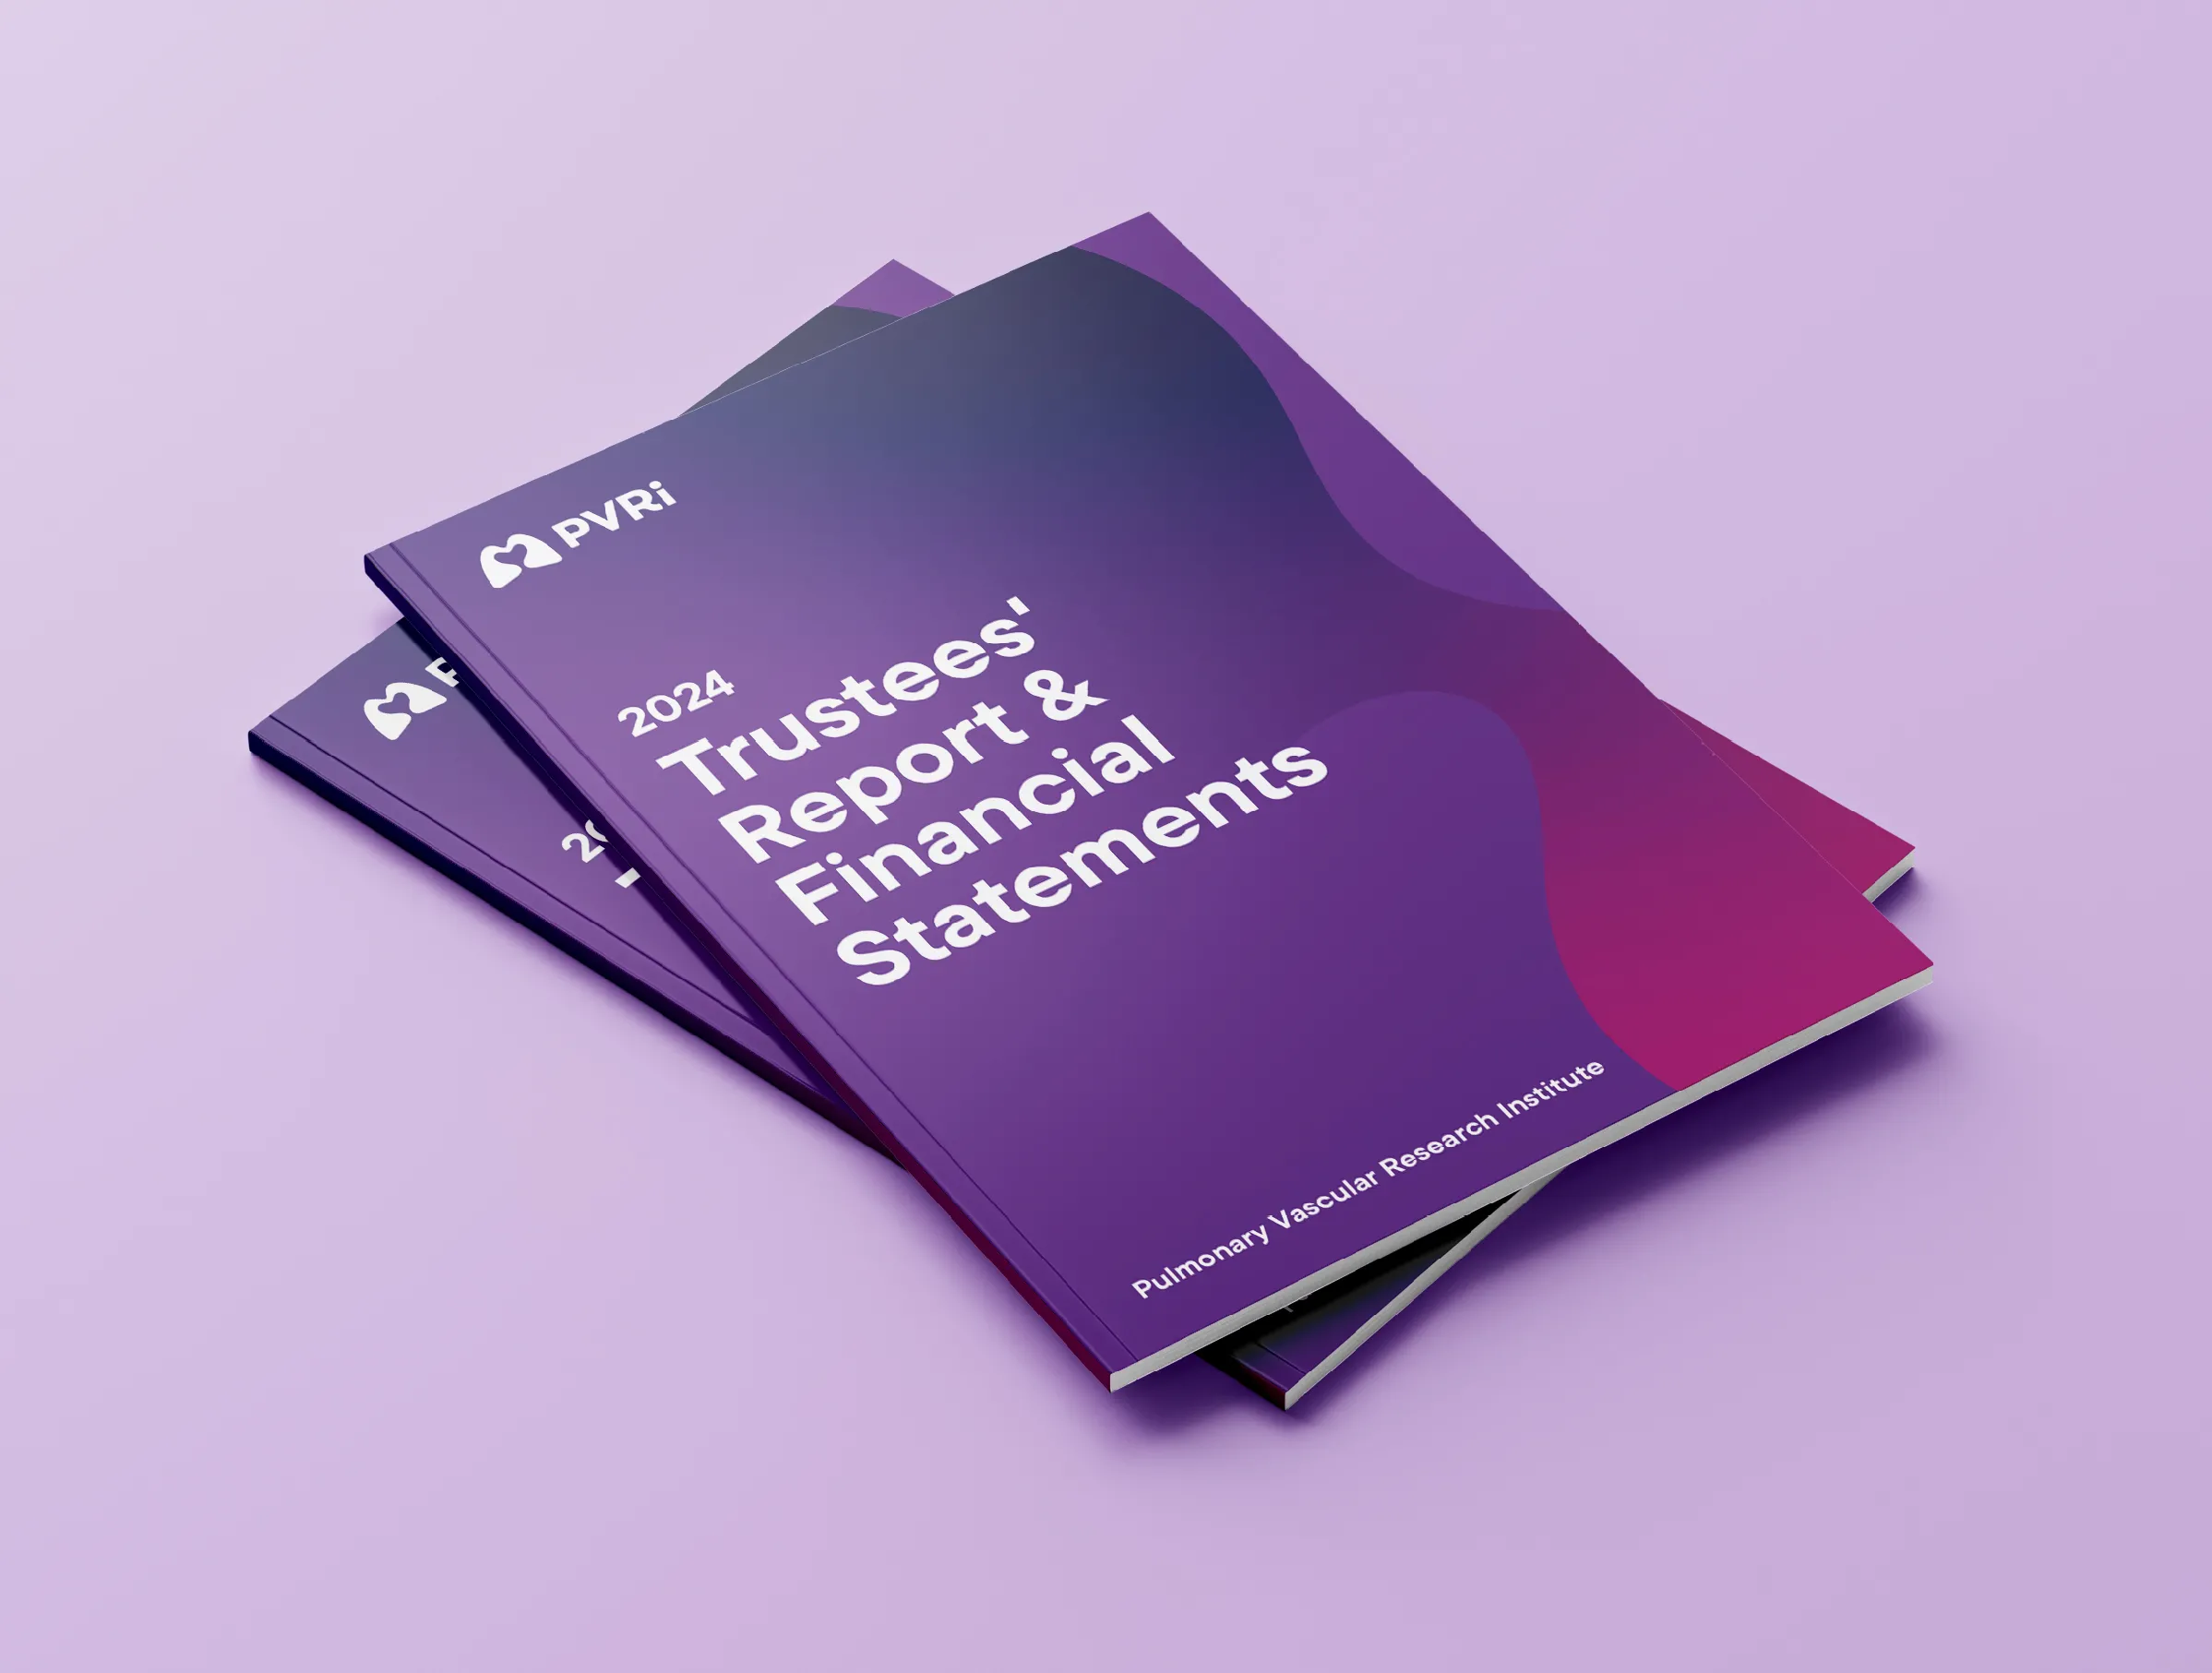 Trustees report and financial statements report covers in purple, pink, plum and indigo